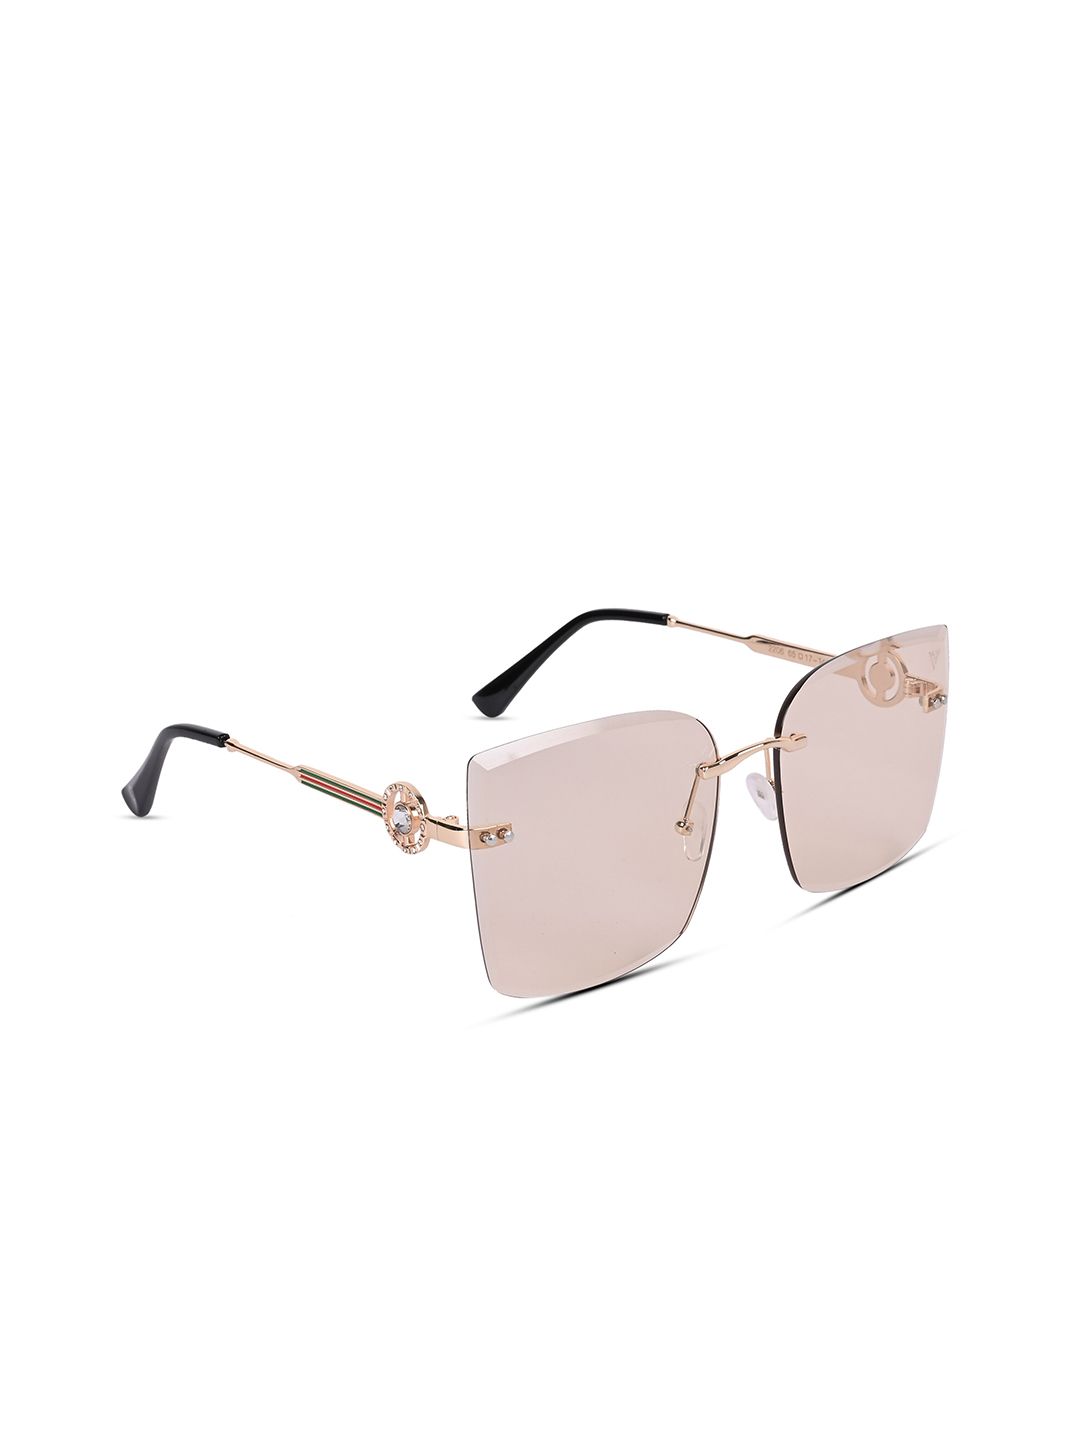 Voyage Women Brown Lens & Gold-Toned Square Sunglasses with UV Protected Lens Price in India